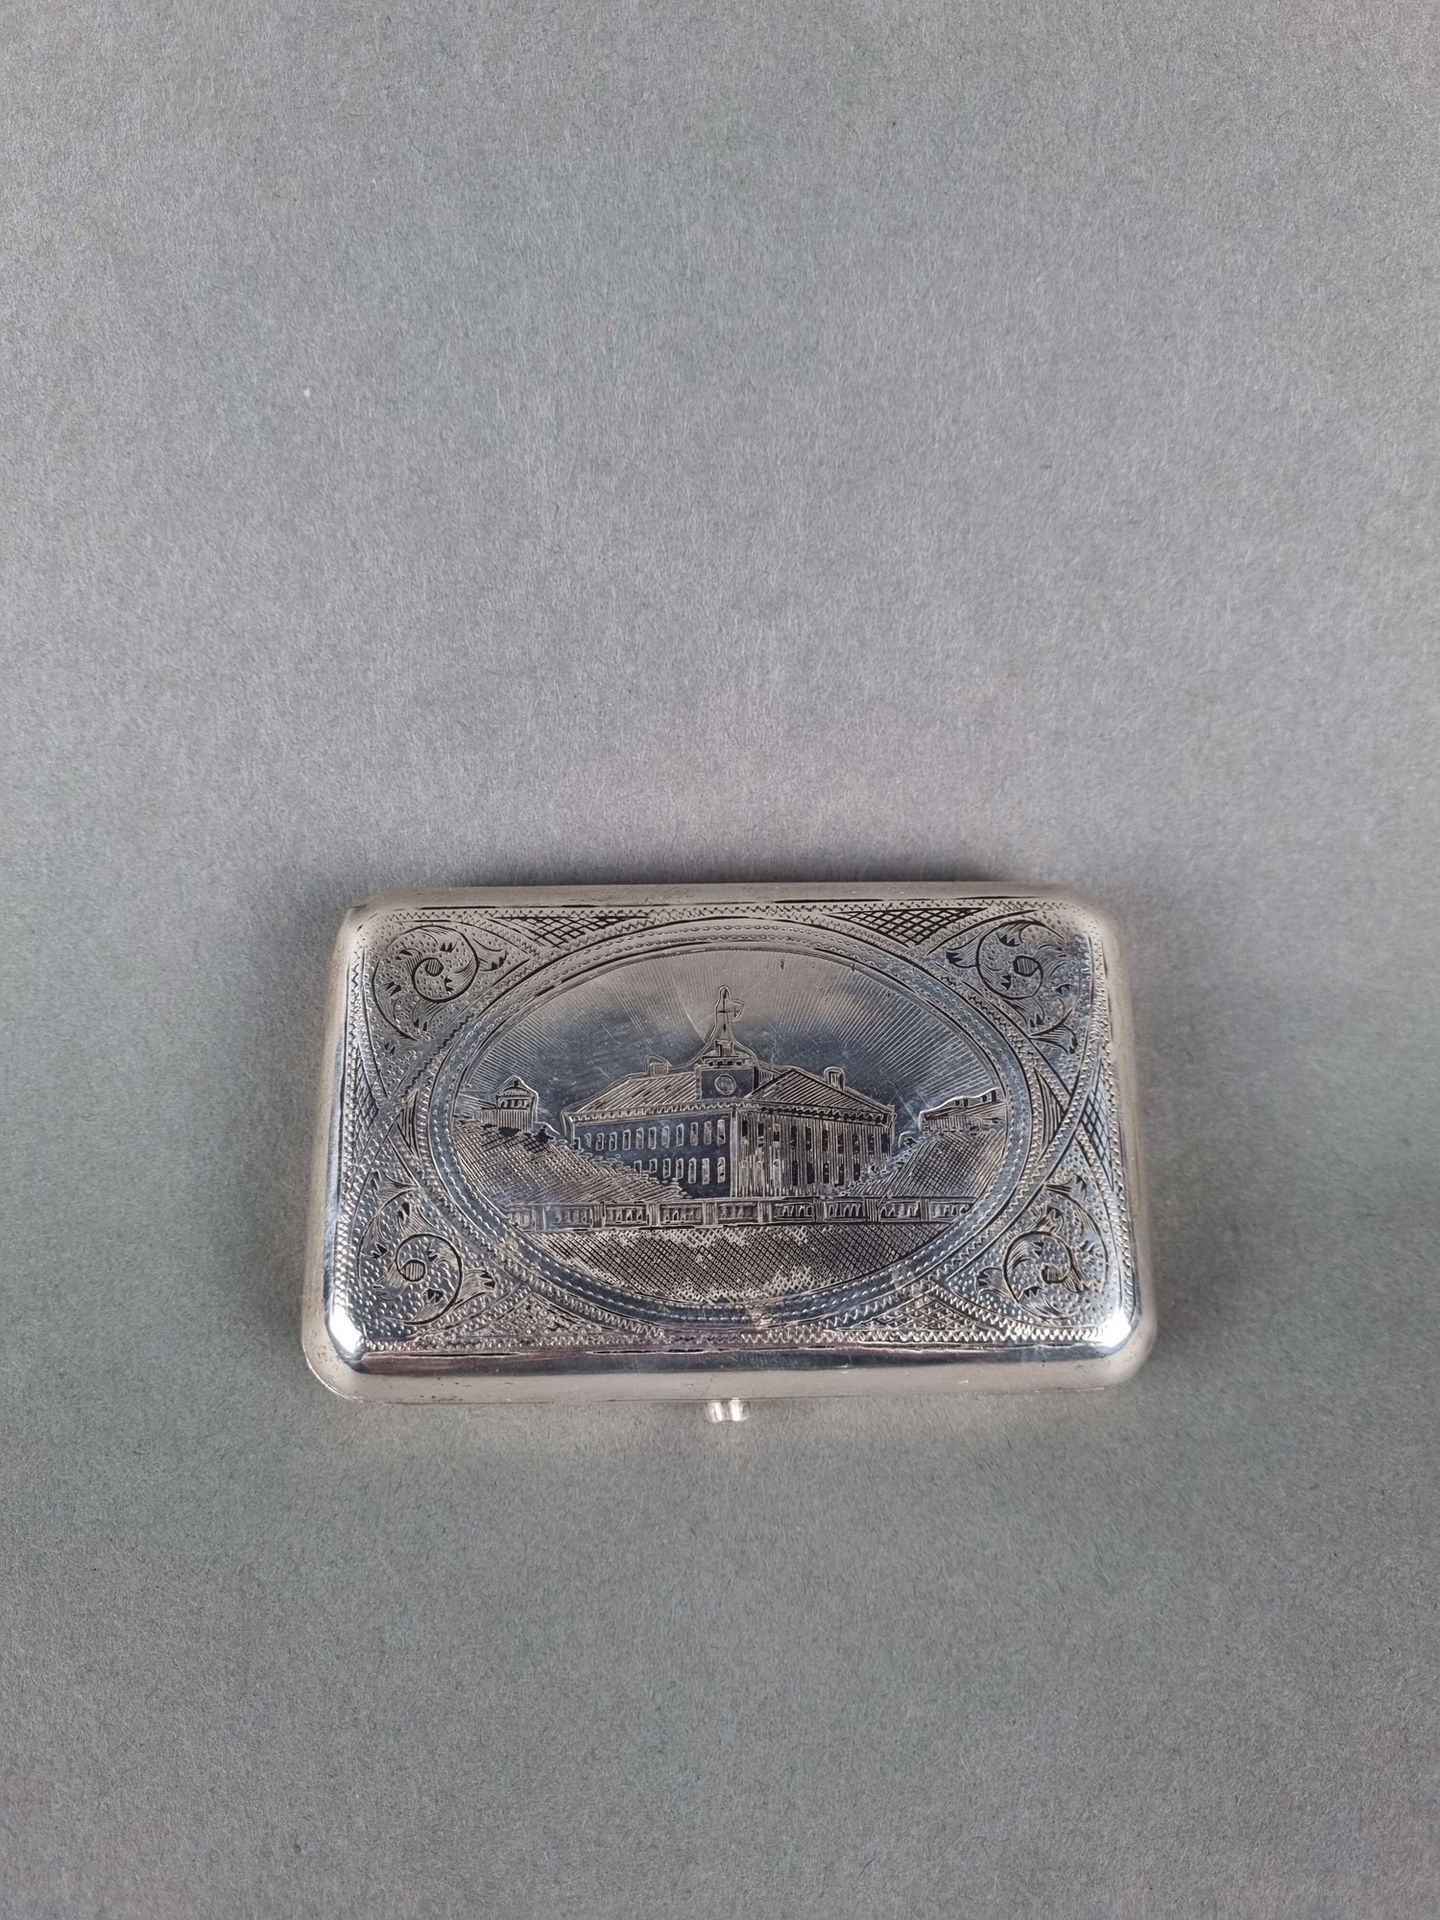 Null Engraved silver box, hallmark of Moscow. 10x6x2 cm